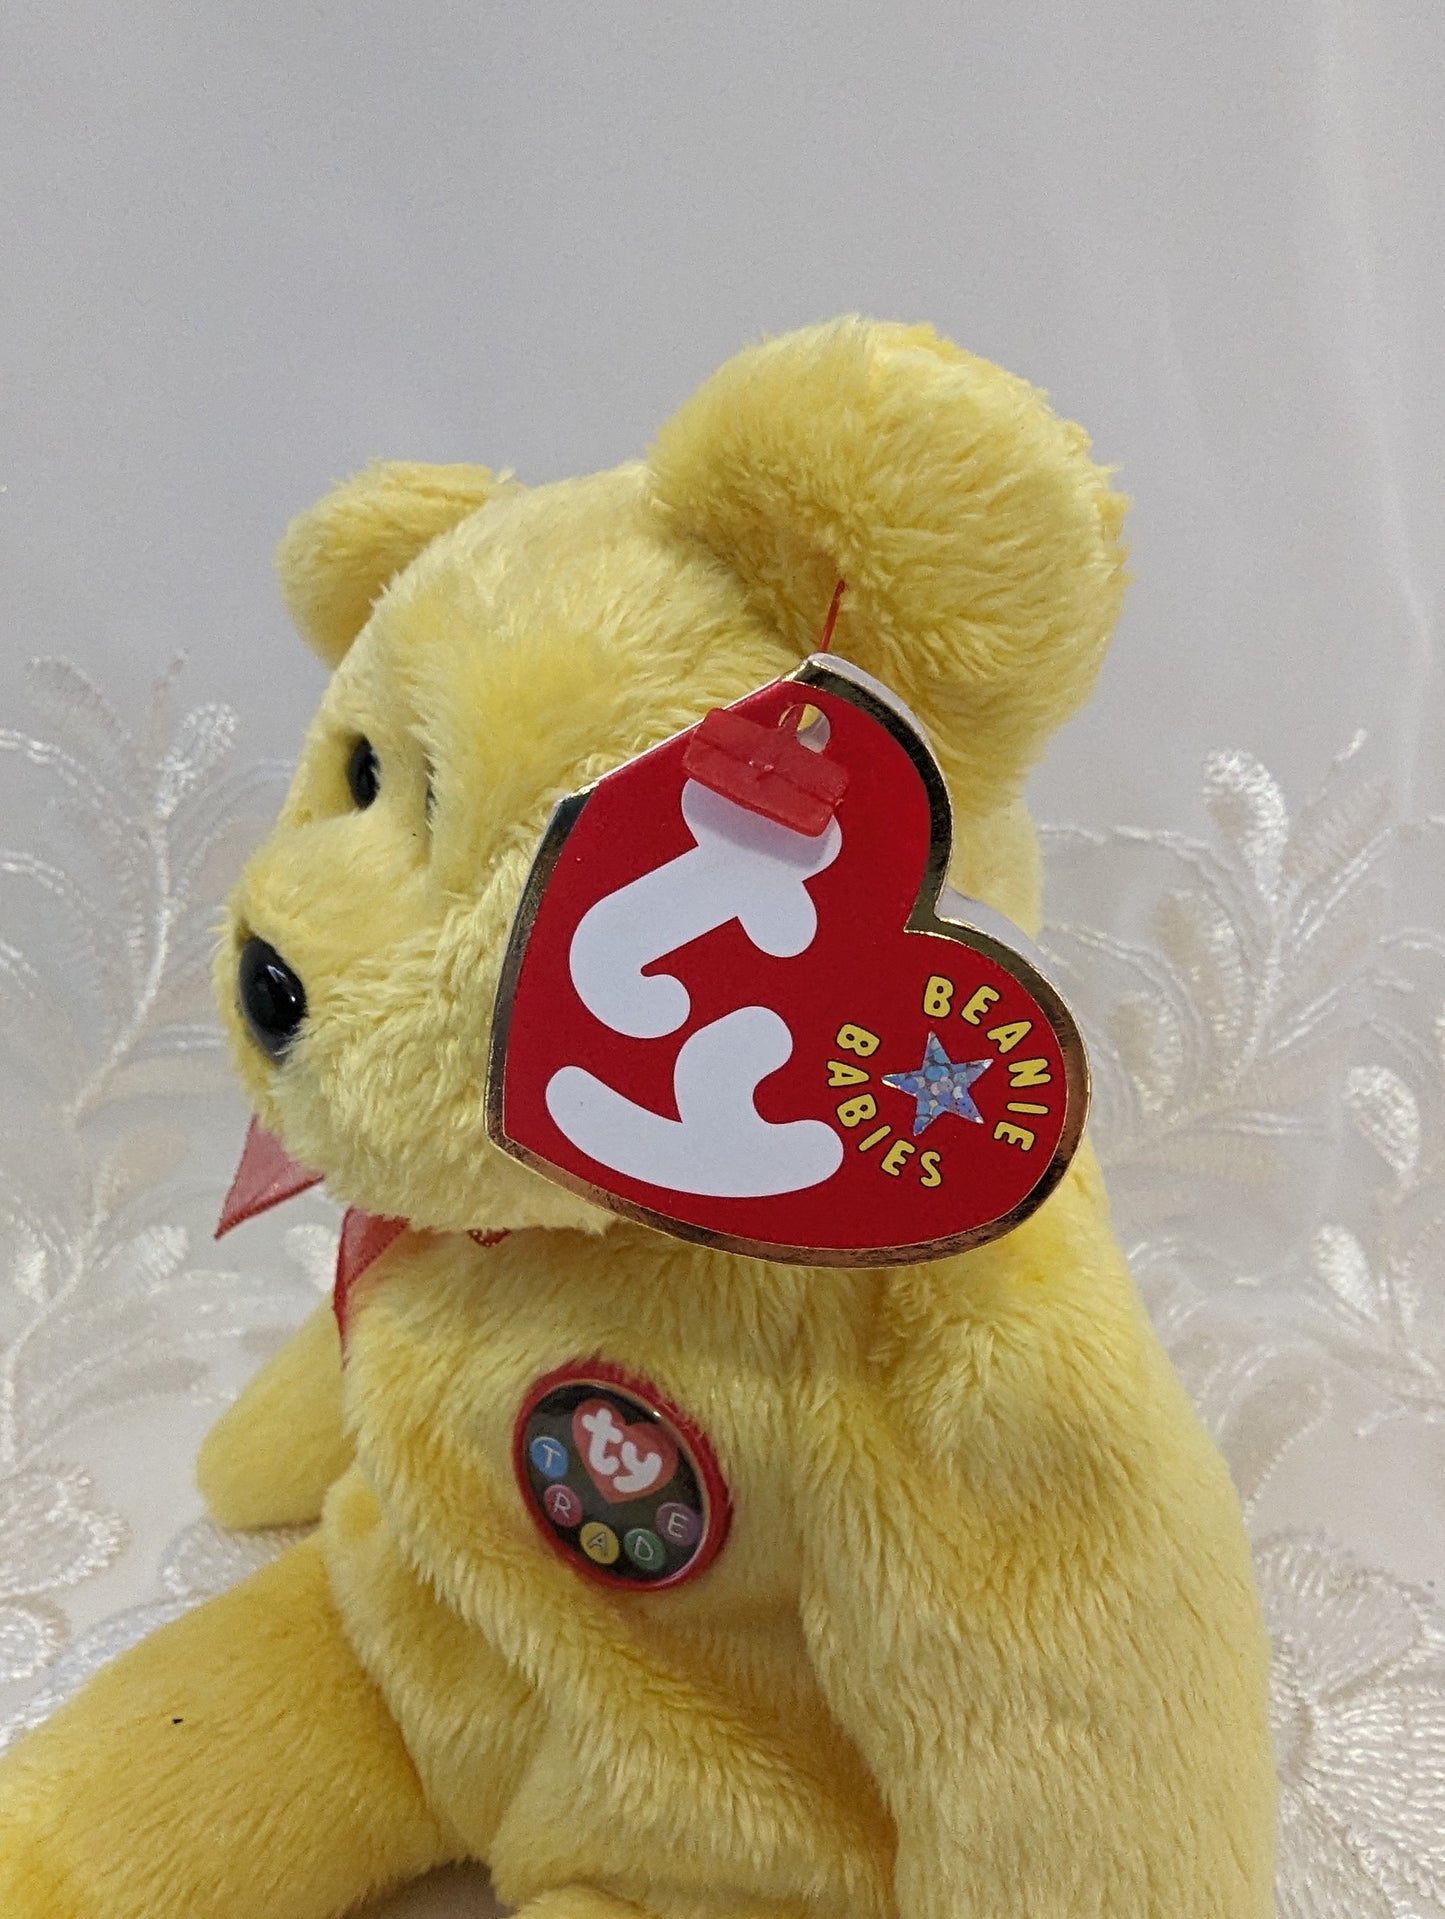 Ty Beanie Baby - Tradee The Yellow Bear (8.5in) - Vintage Beanies Canada